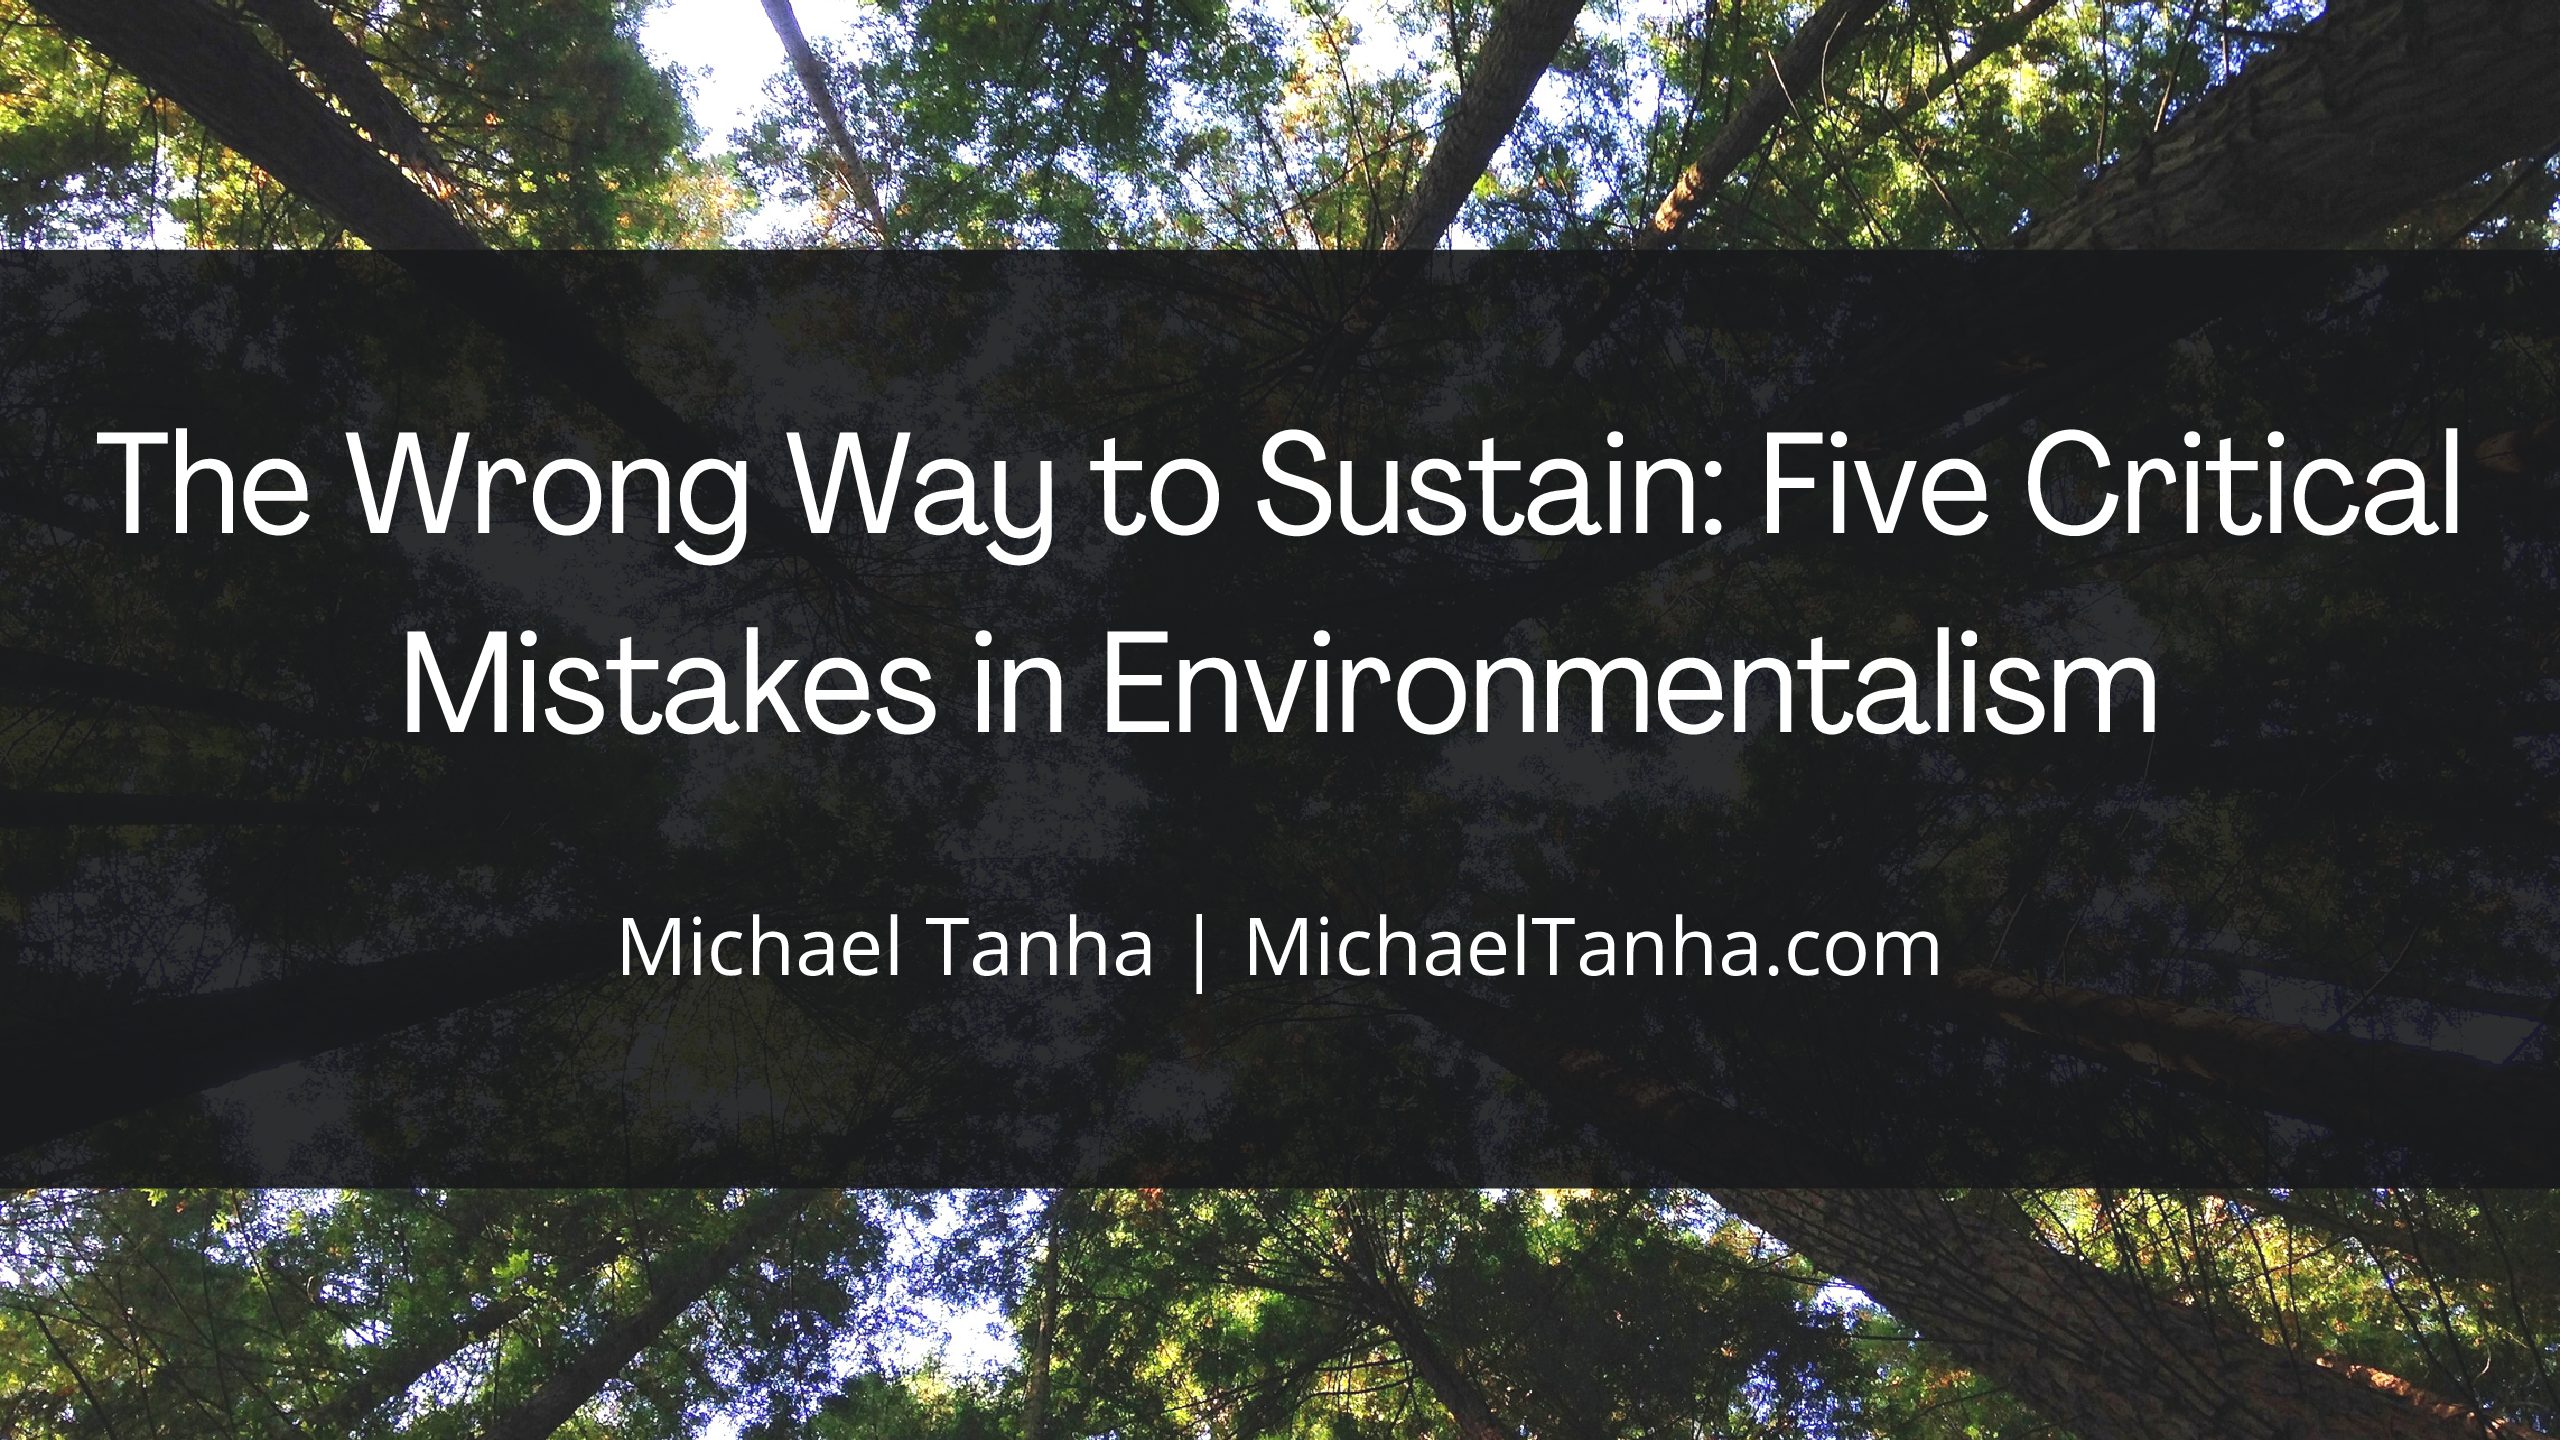 The Wrong Way to Sustain: Five Critical Mistakes in Environmentalism